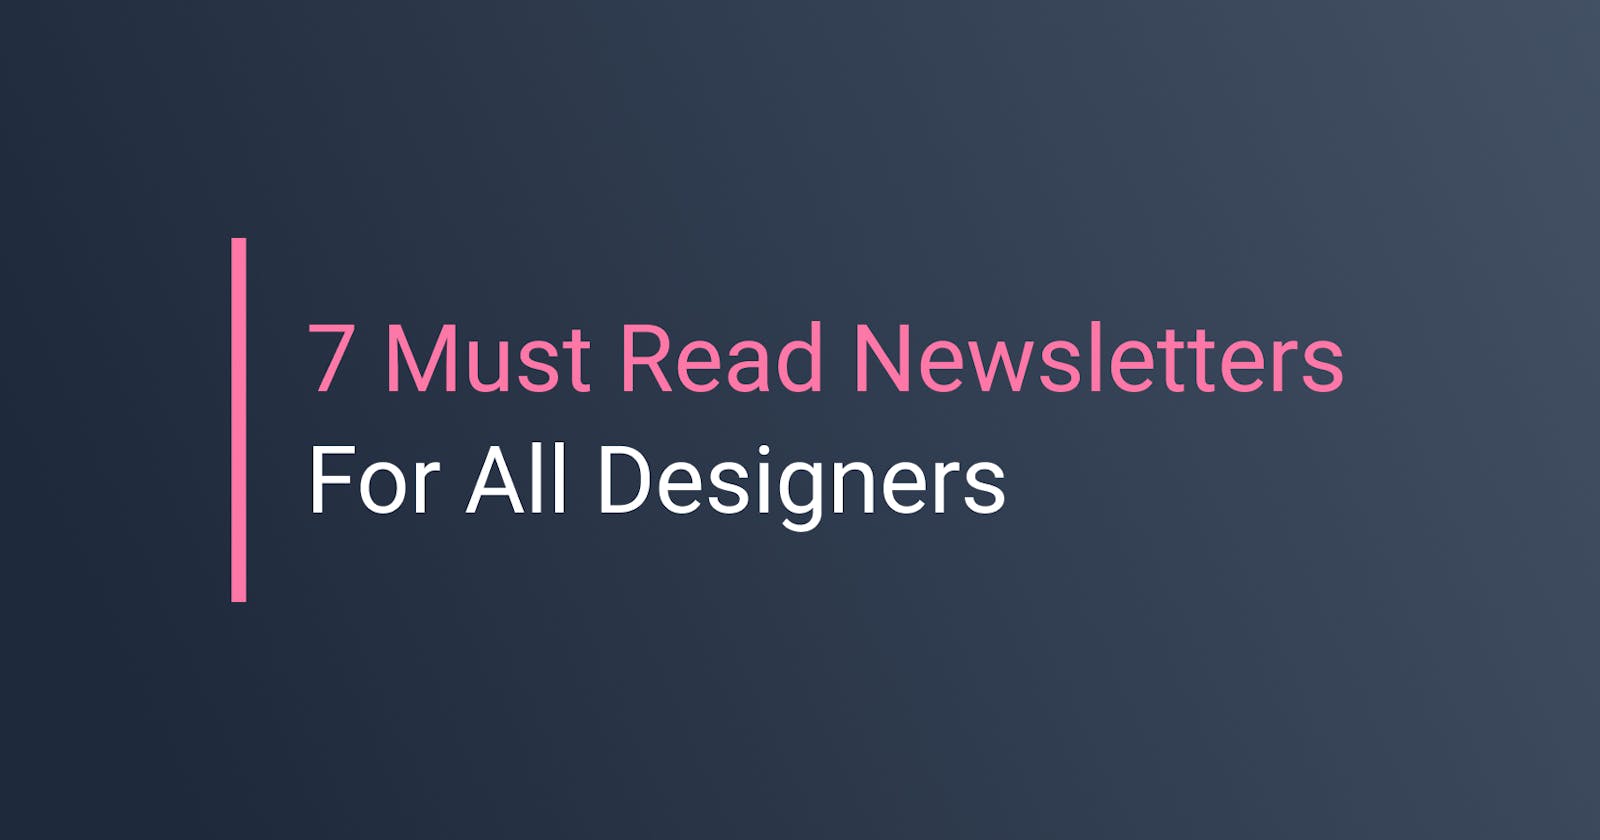 These 7 Newsletters Are A Must Read For All Designers